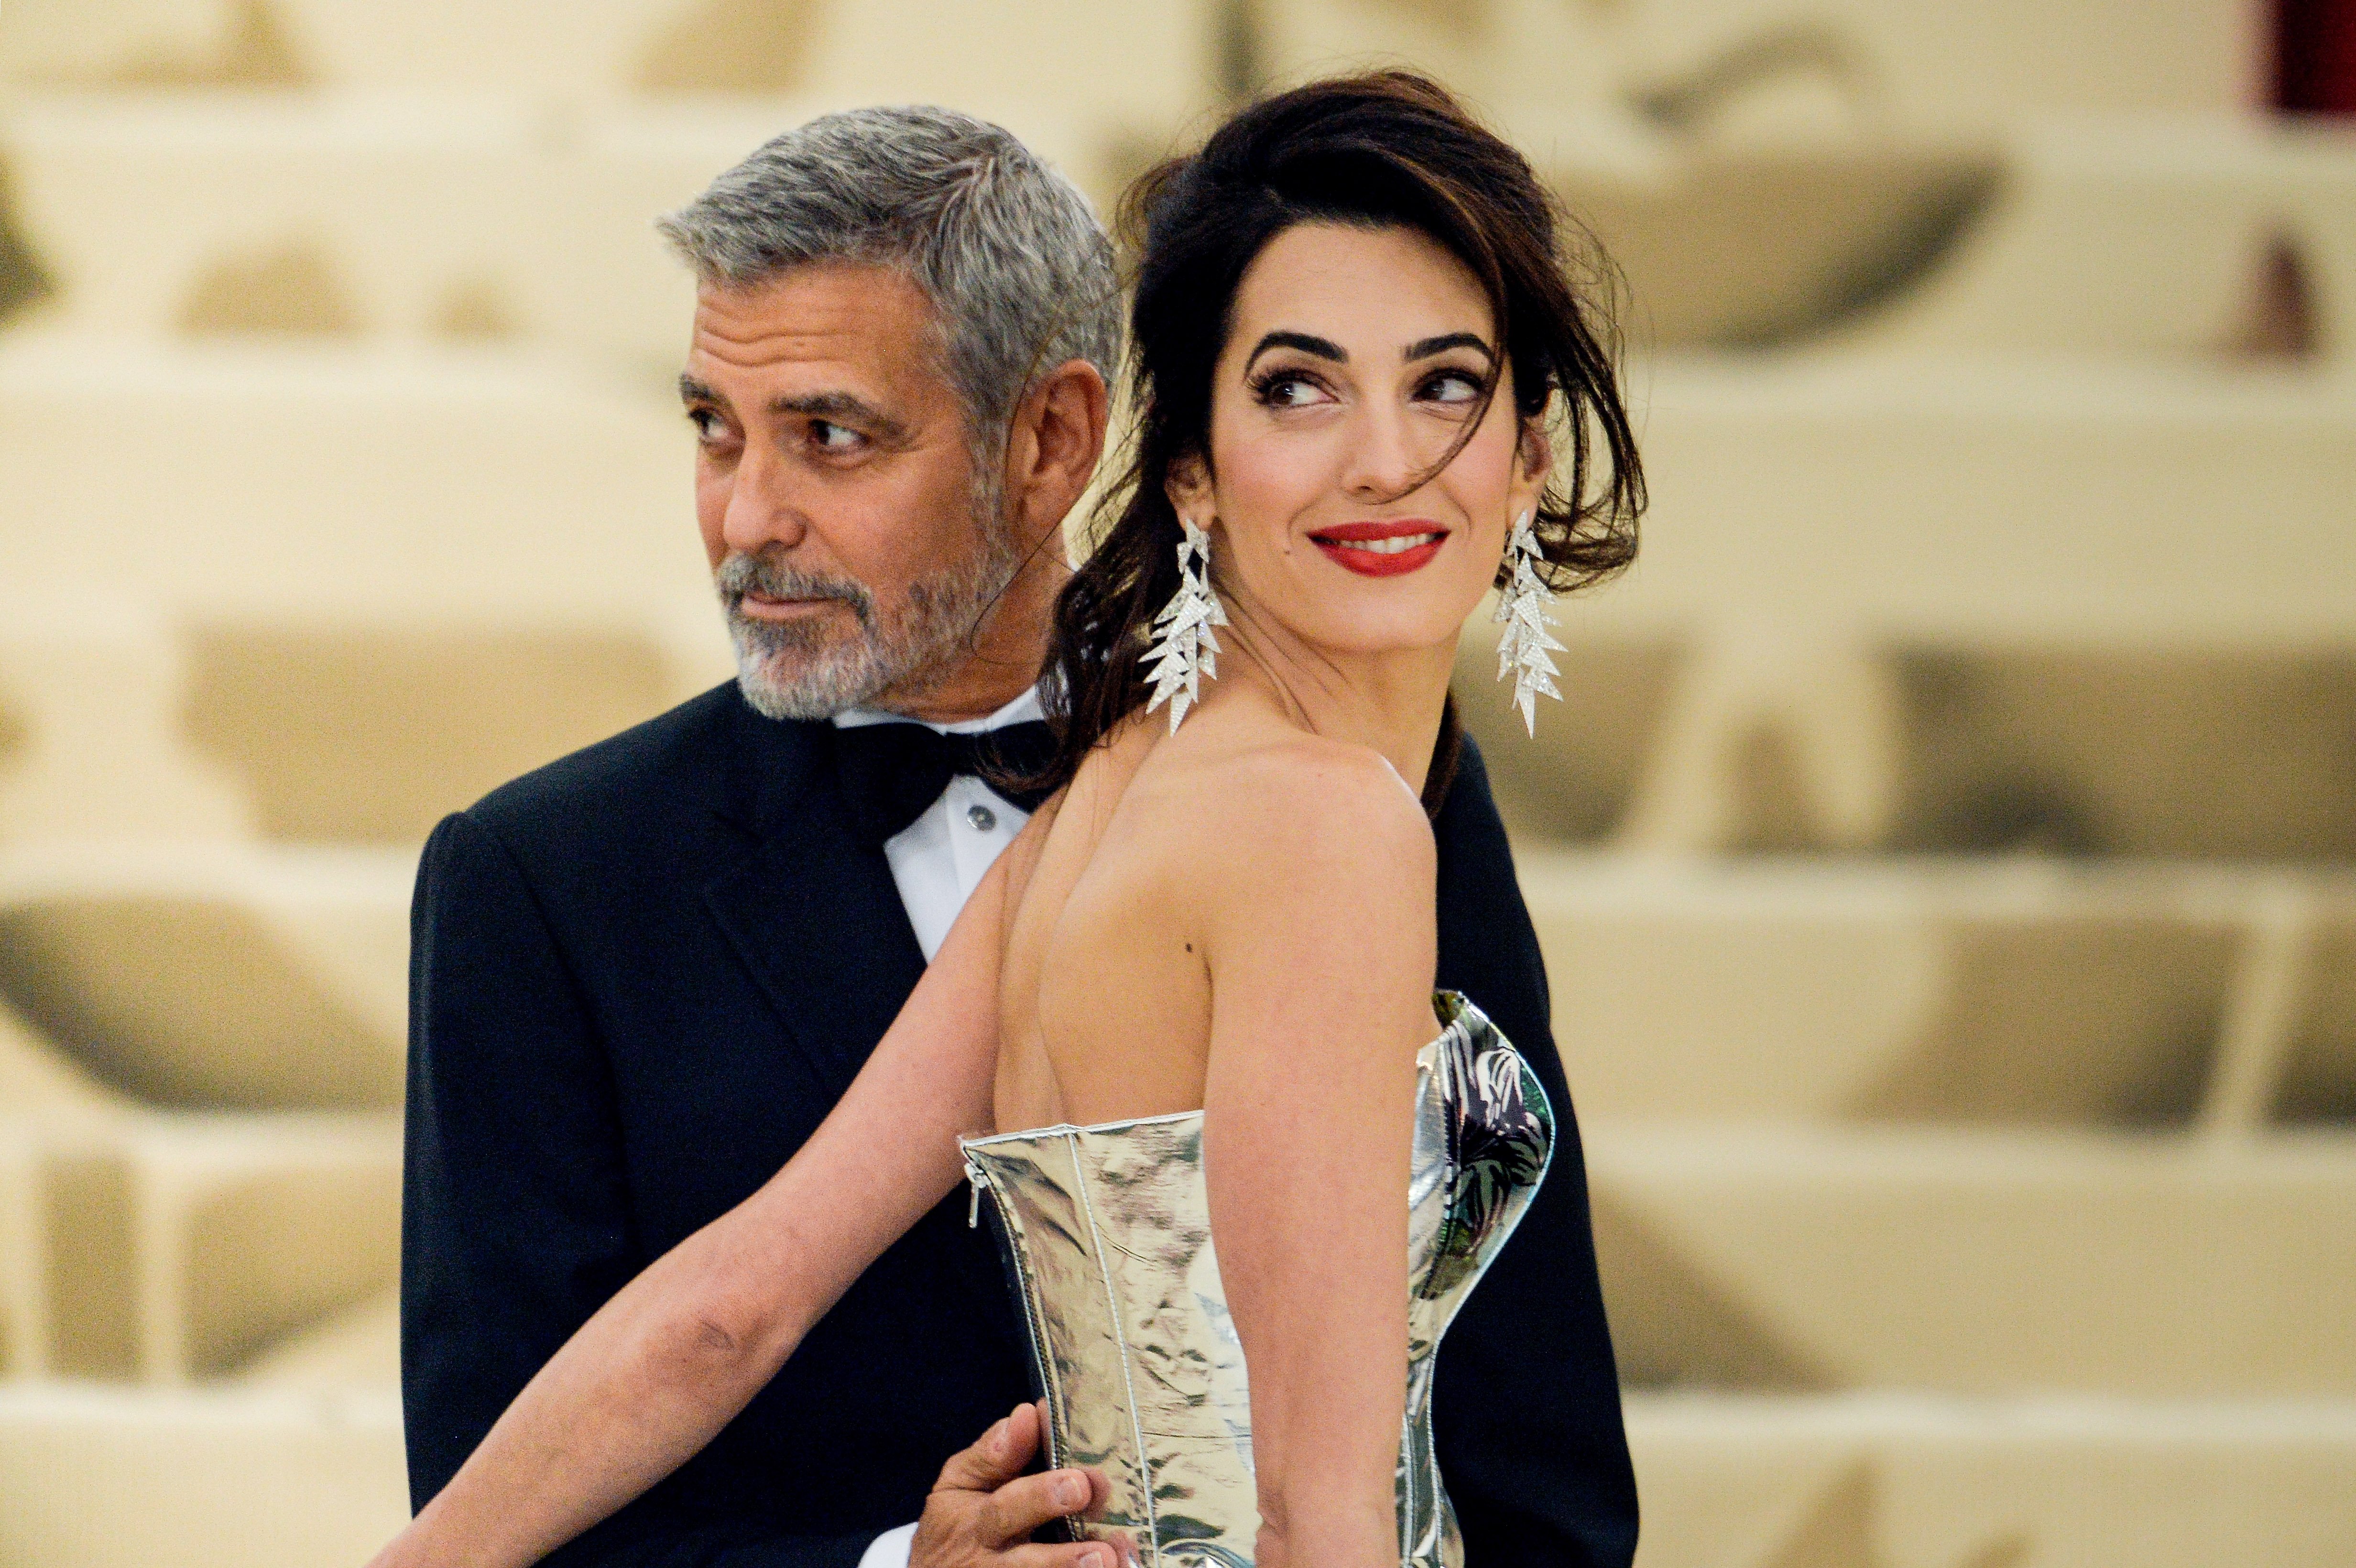 George Clooney and Amal Clooney enter the Heavenly Bodies: Fashion & The Catholic Imagination Costume Institute Gala at The Metropolitan Museum on May 07, 2018 in New York City | Source: Getty Images